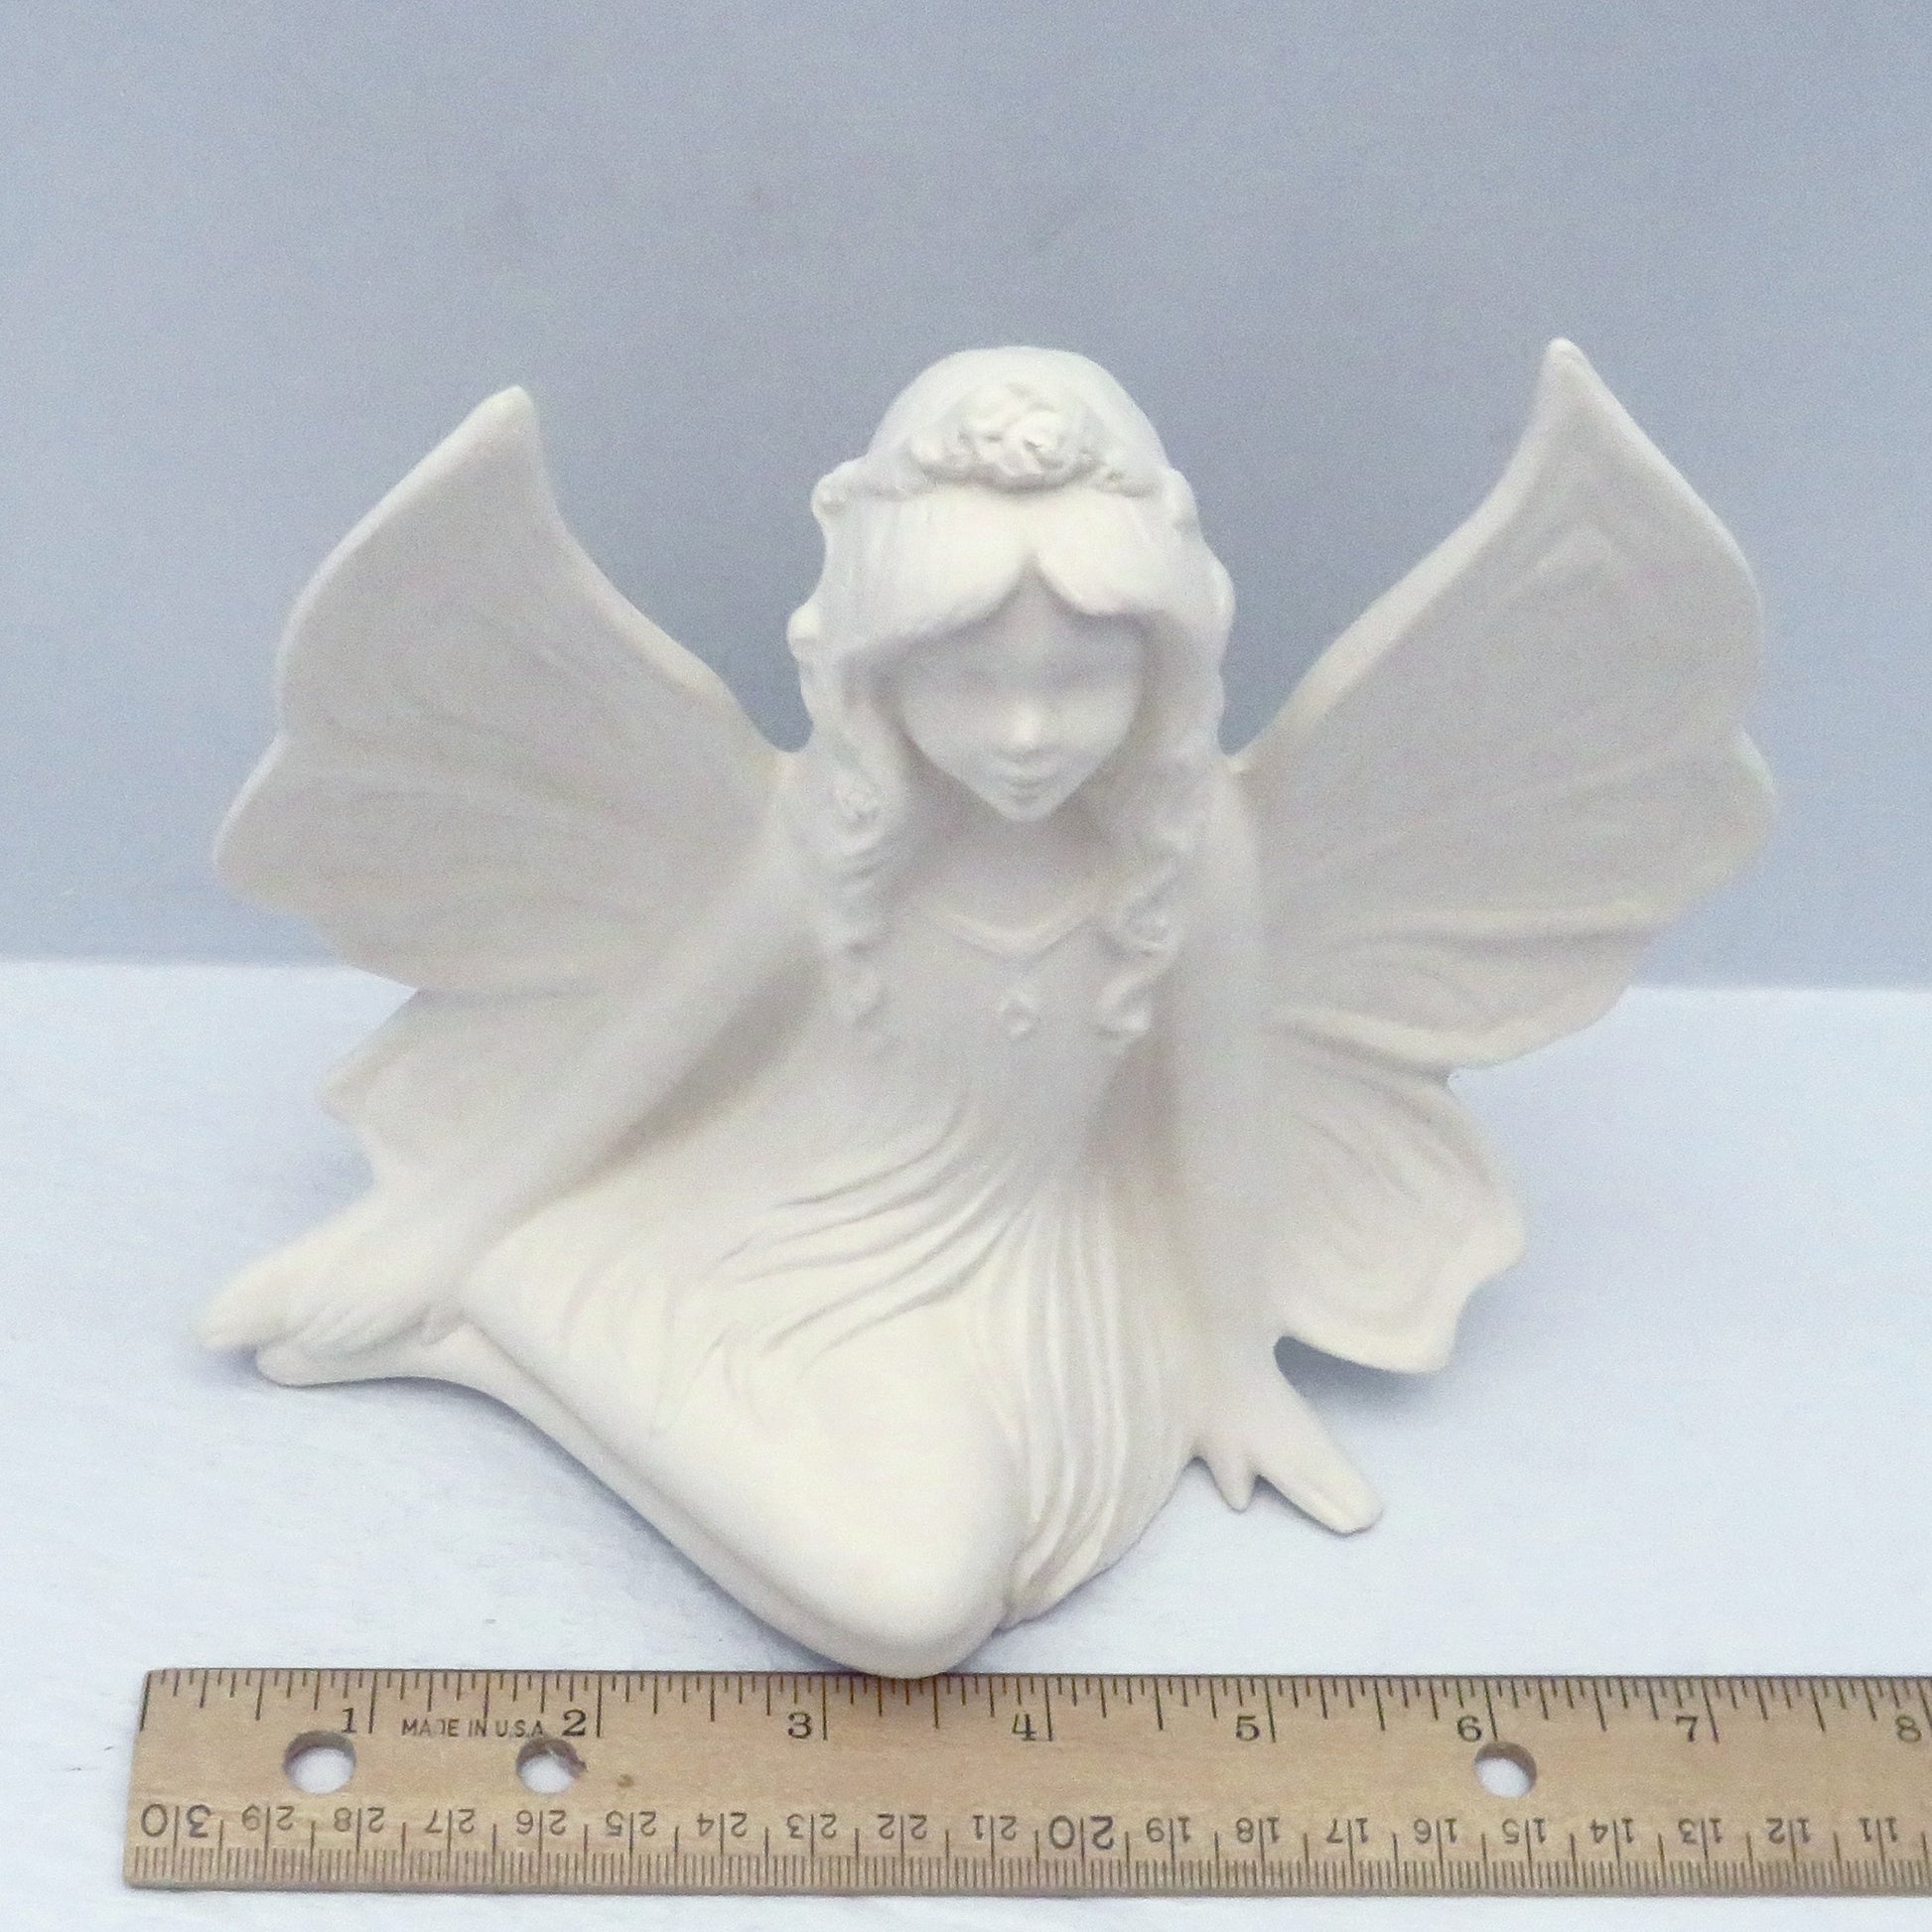 handmade paintable ceramic fairy figurine from a higher view showing a ruler.  She is approximately 7 inches wide